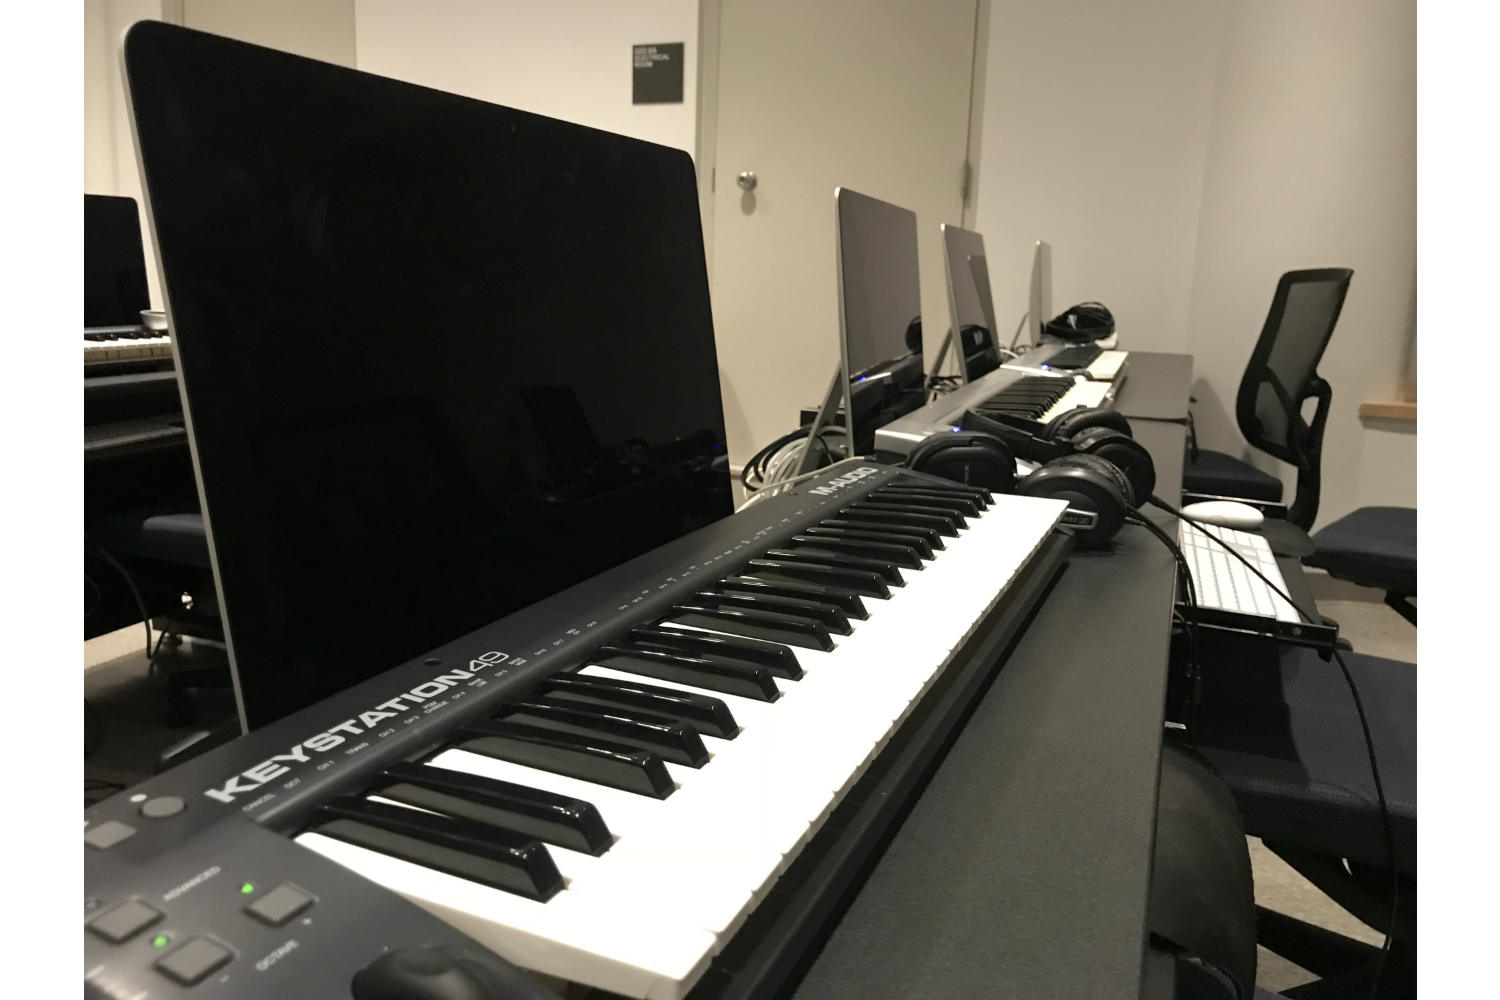 Drexel University in Philadelphia, PA is one of America's 15 largest universities. Their brand-new recording facilities, designed by the WSDG team, expands their music and recording program. MIDI Lab close-up